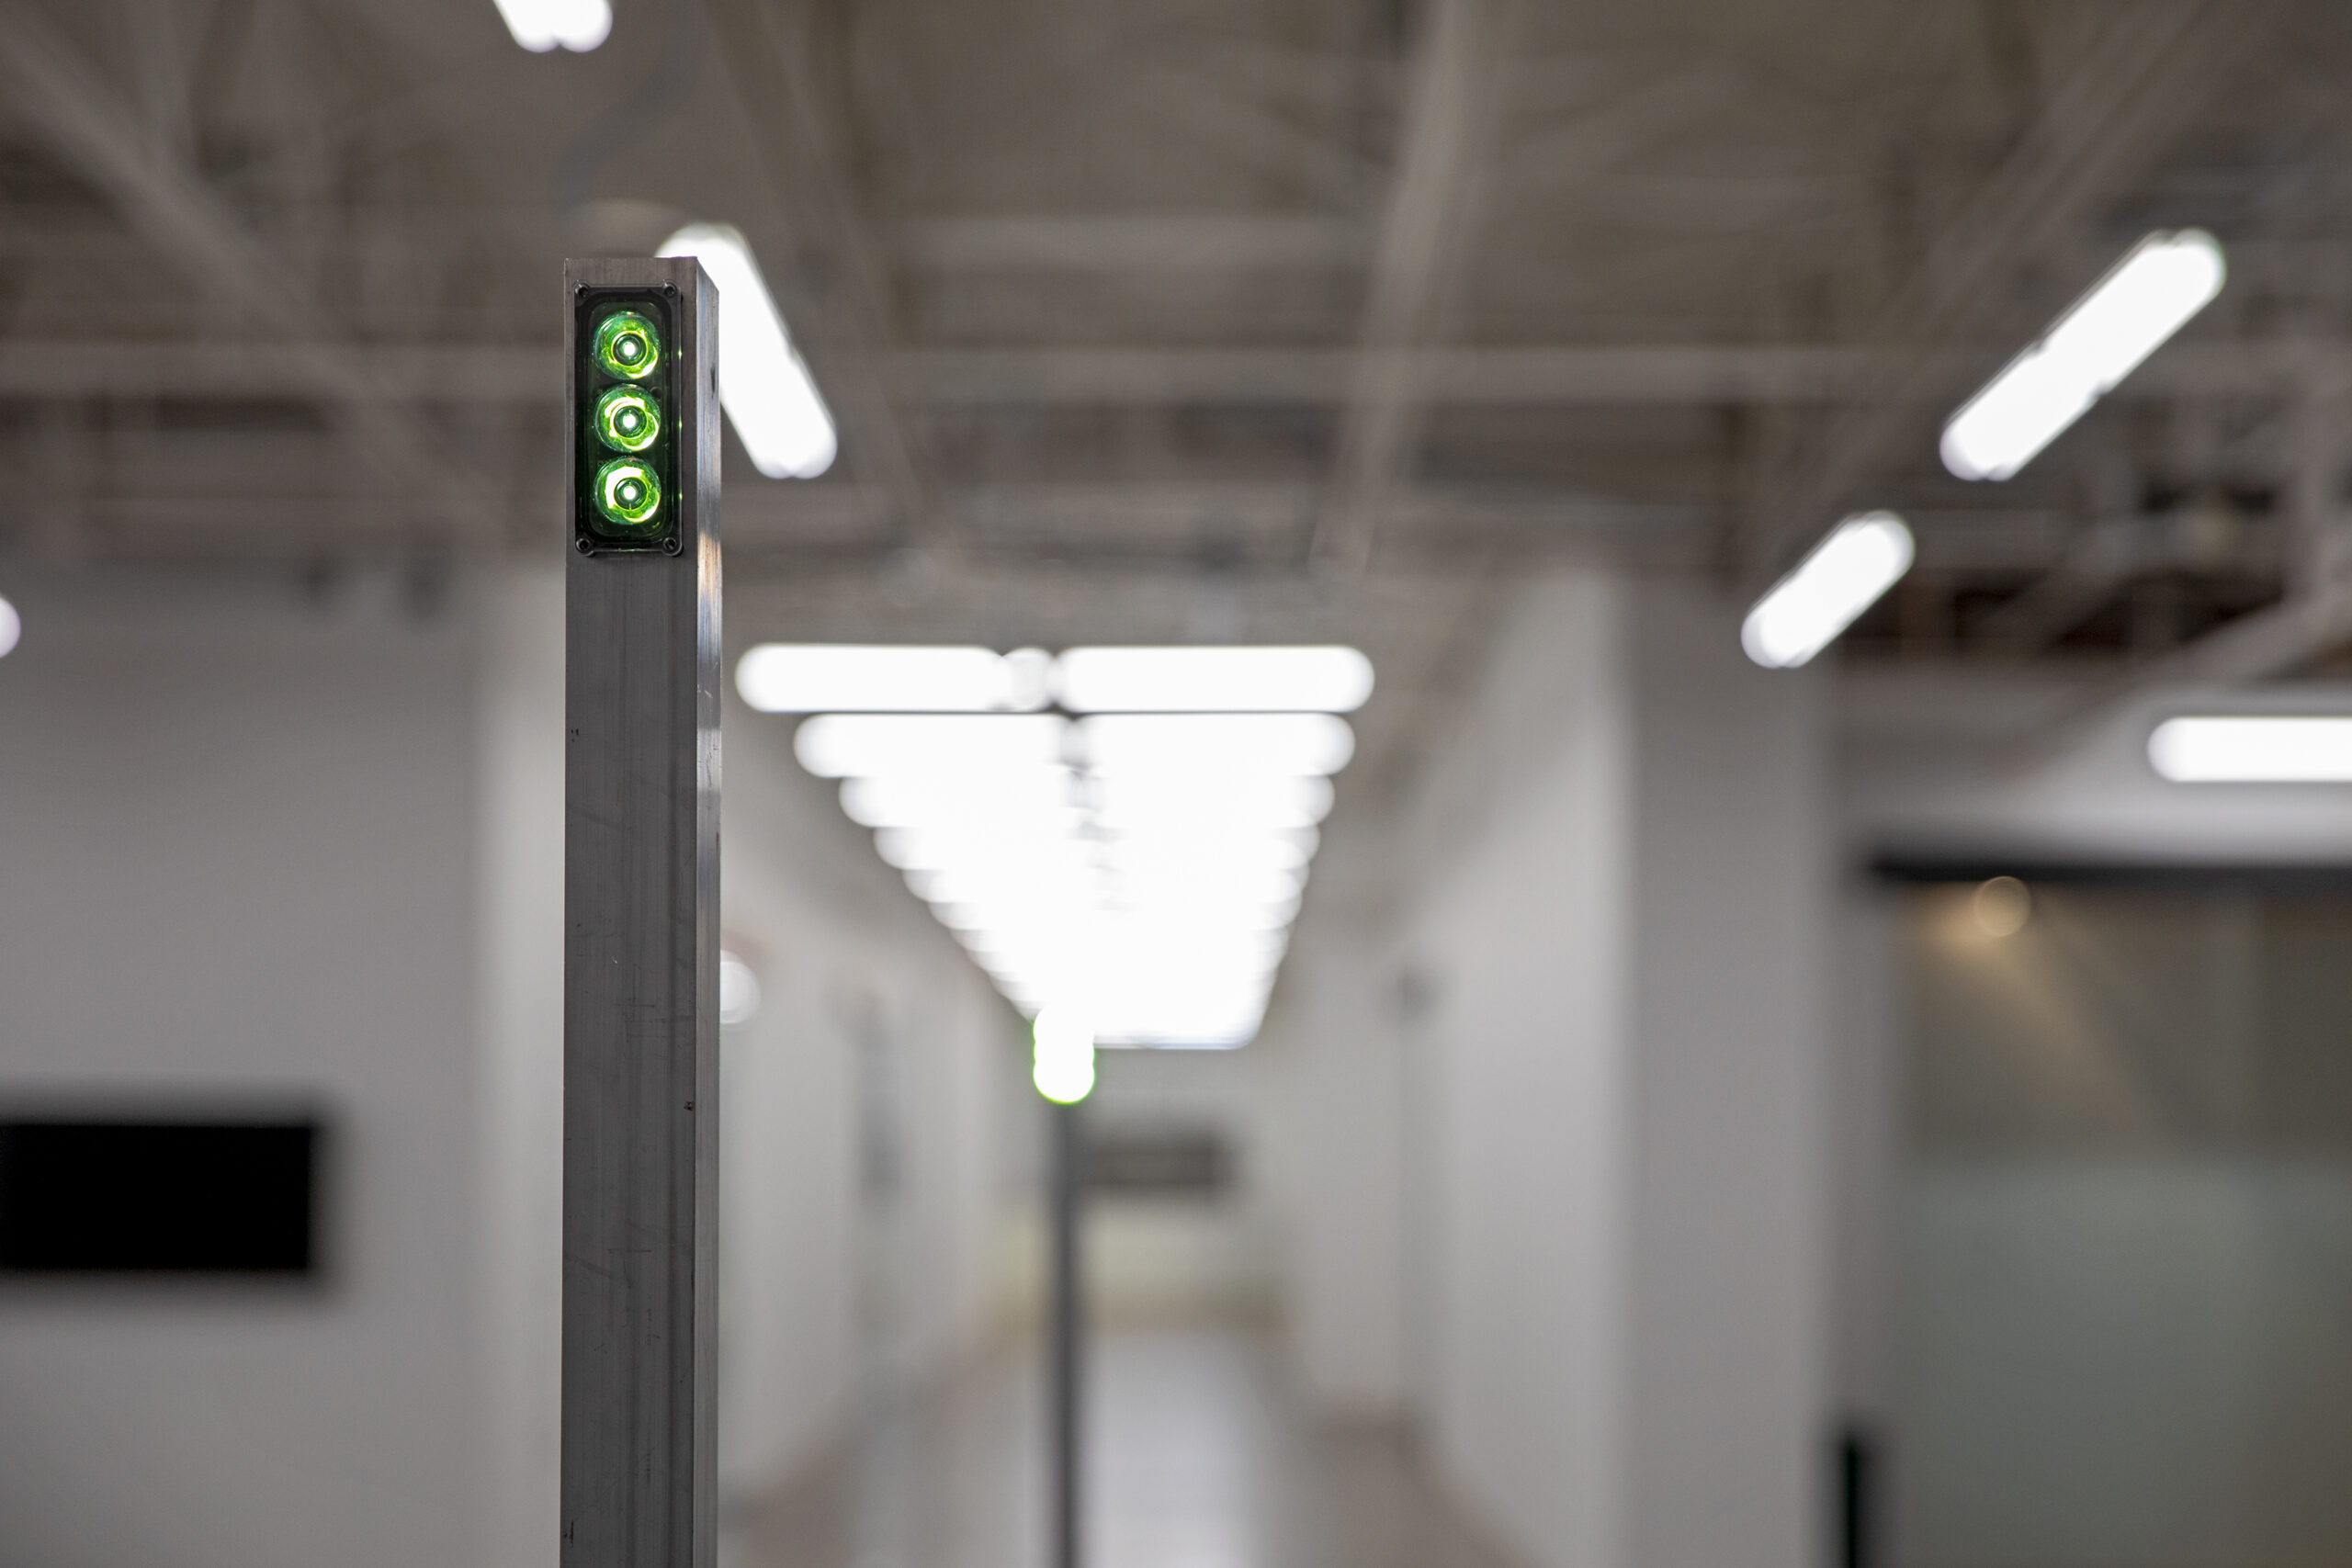 Detailed view of a light rod's lime green LED lamp at low power in a hallway with blurred fluorescent lights receding into the distance